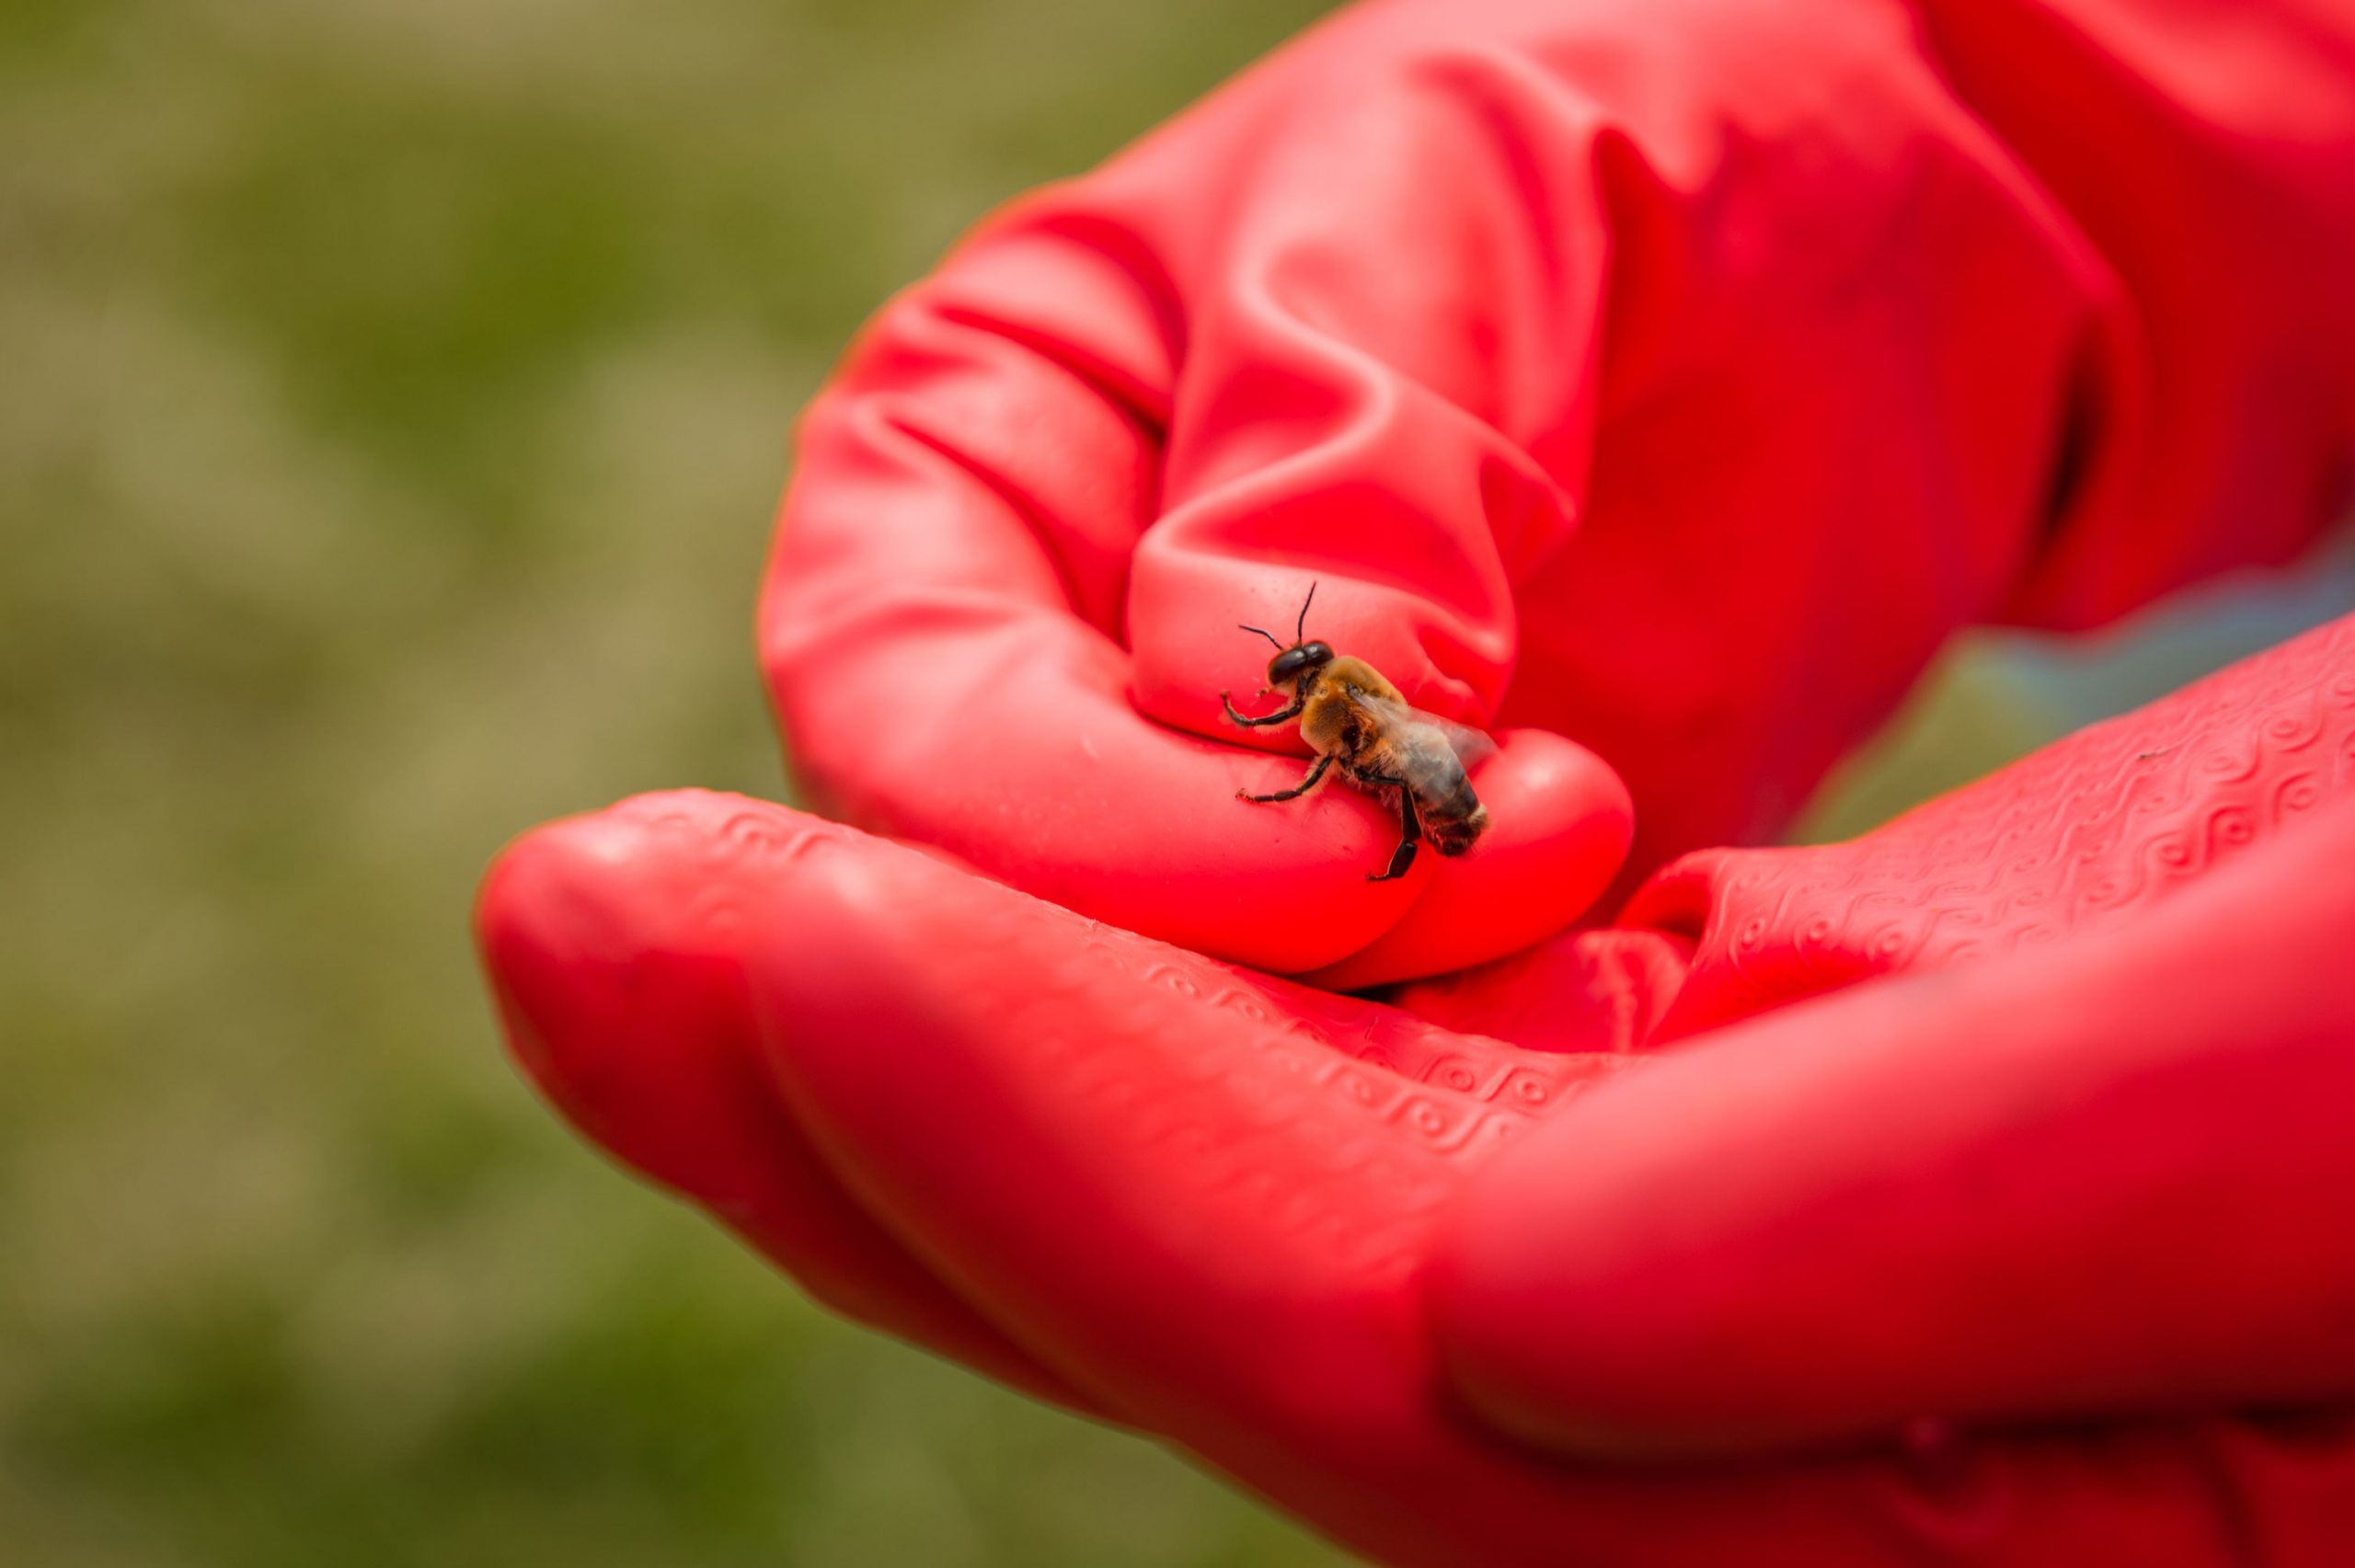 A pair of hands in red gloves holding a bee